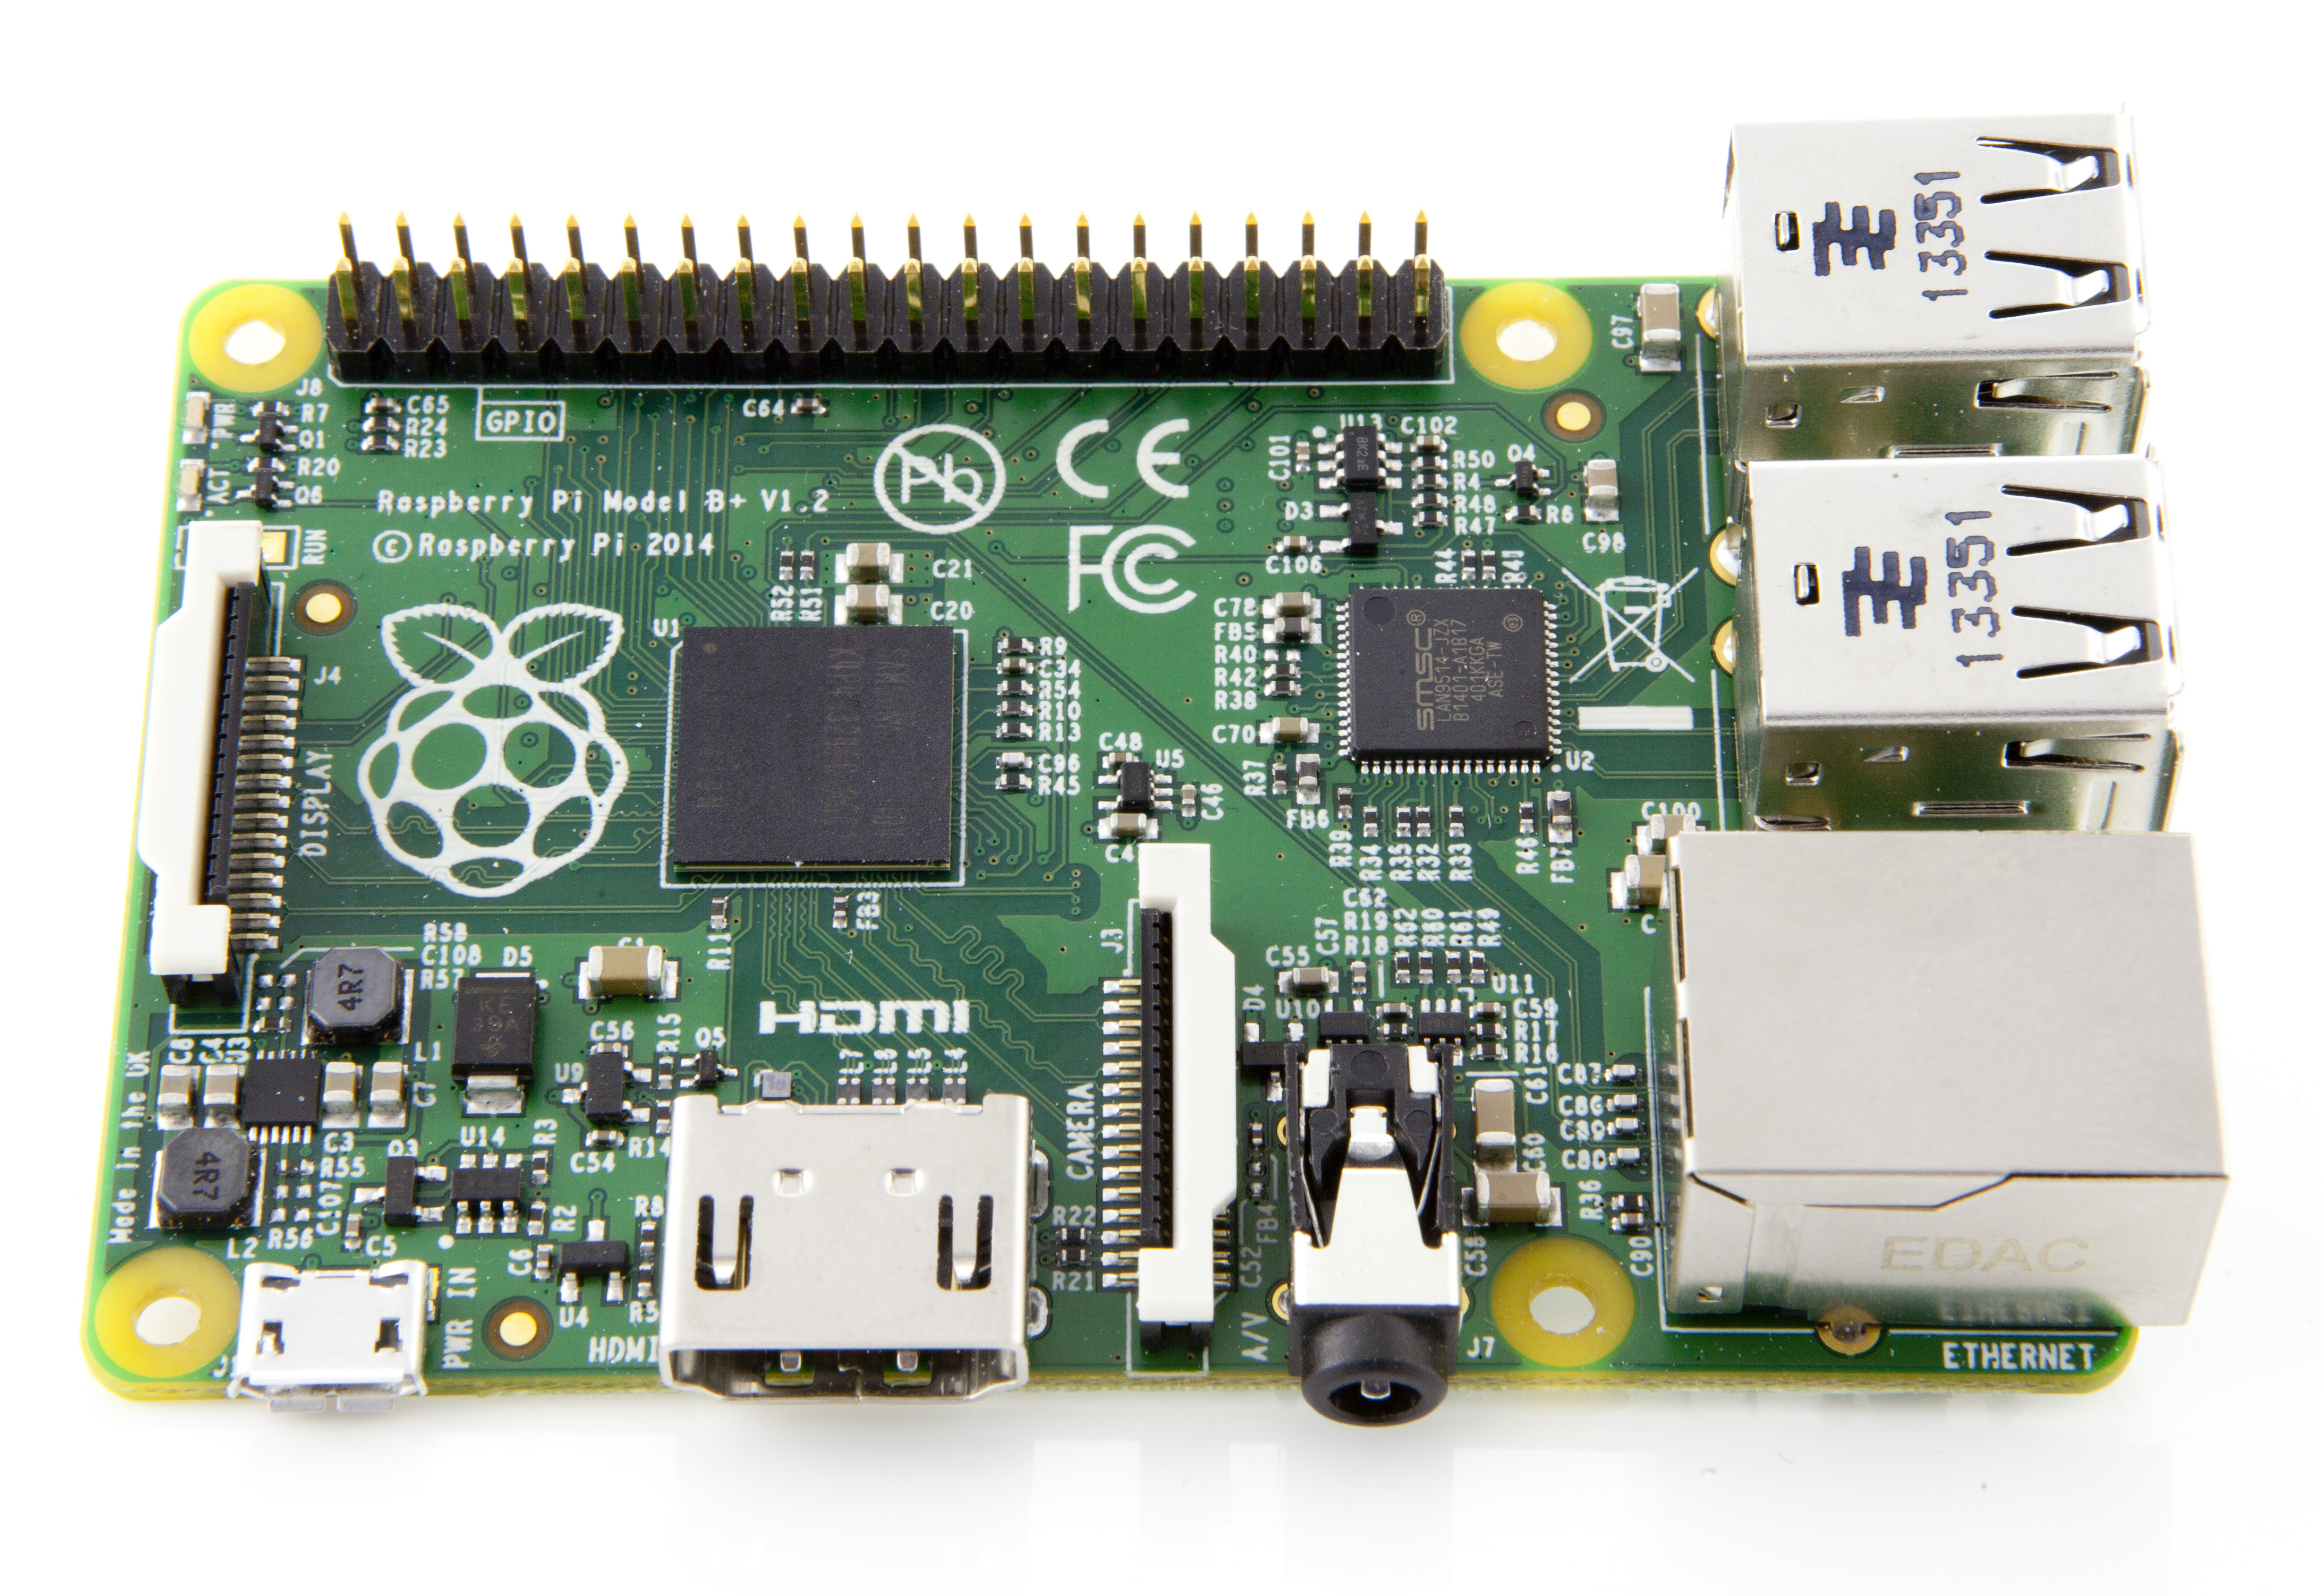 Raspberry Pi - The idea behind a tiny and affordable computer for kids came in 2006, when Eben Upton, Rob Mullins, Jack Lang and Alan Mycroft, based at the University of Cambridge’s Computer Laboratory, became concerned about the year‑on-year decline in the numbers and skills levels of the A‑Level students applying to read Computer Science.